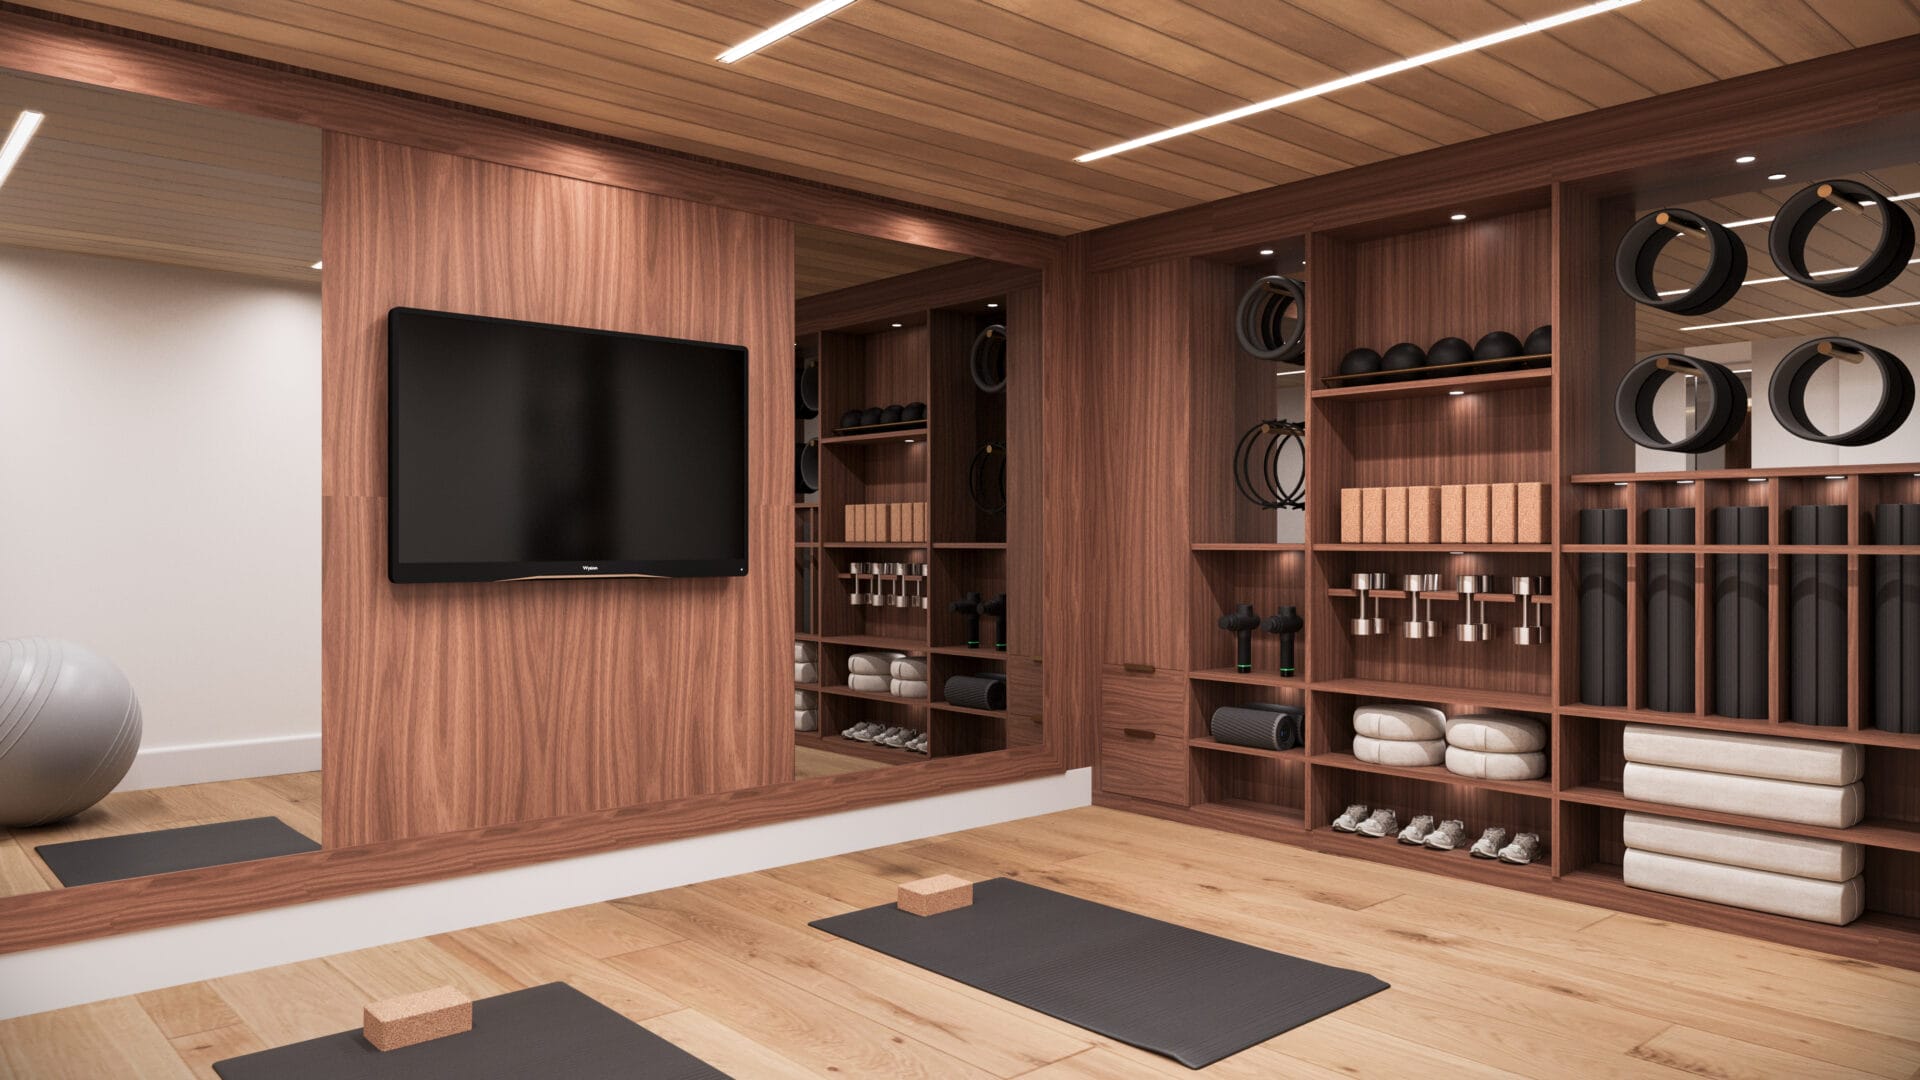 A room with wooden walls and floors, yoga mats on the floor.